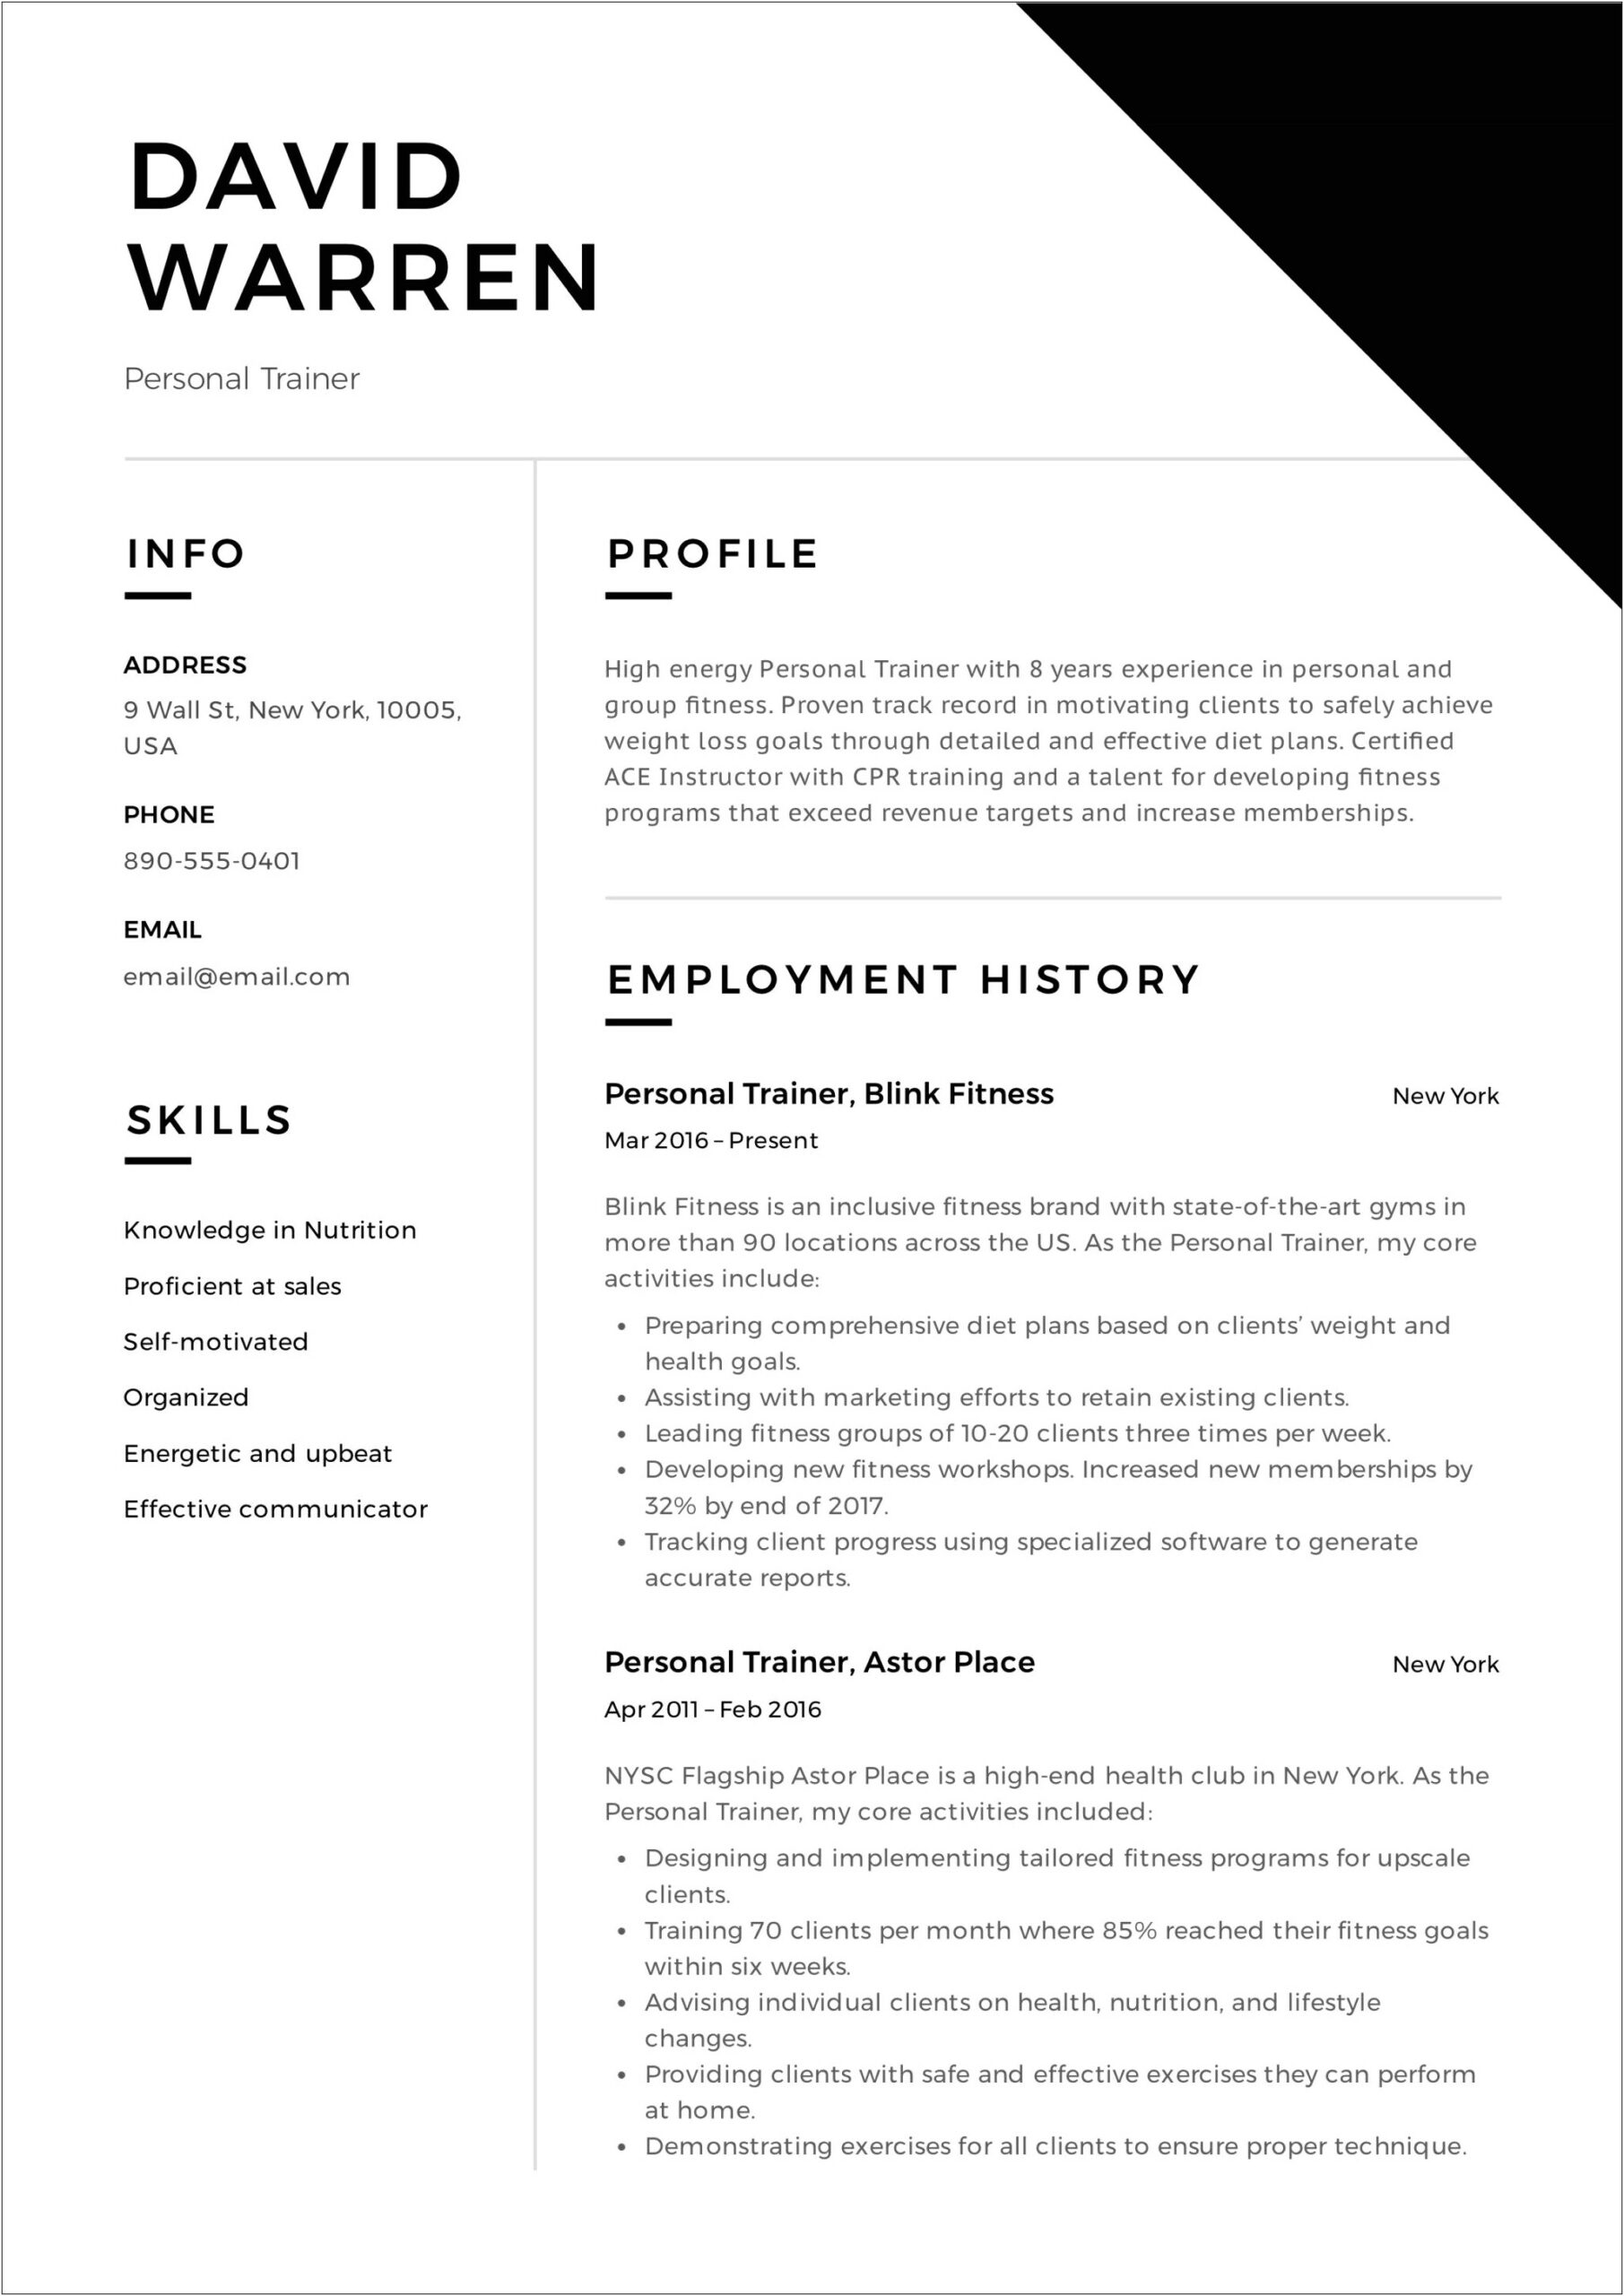 Resume Objective Examples For Trainer